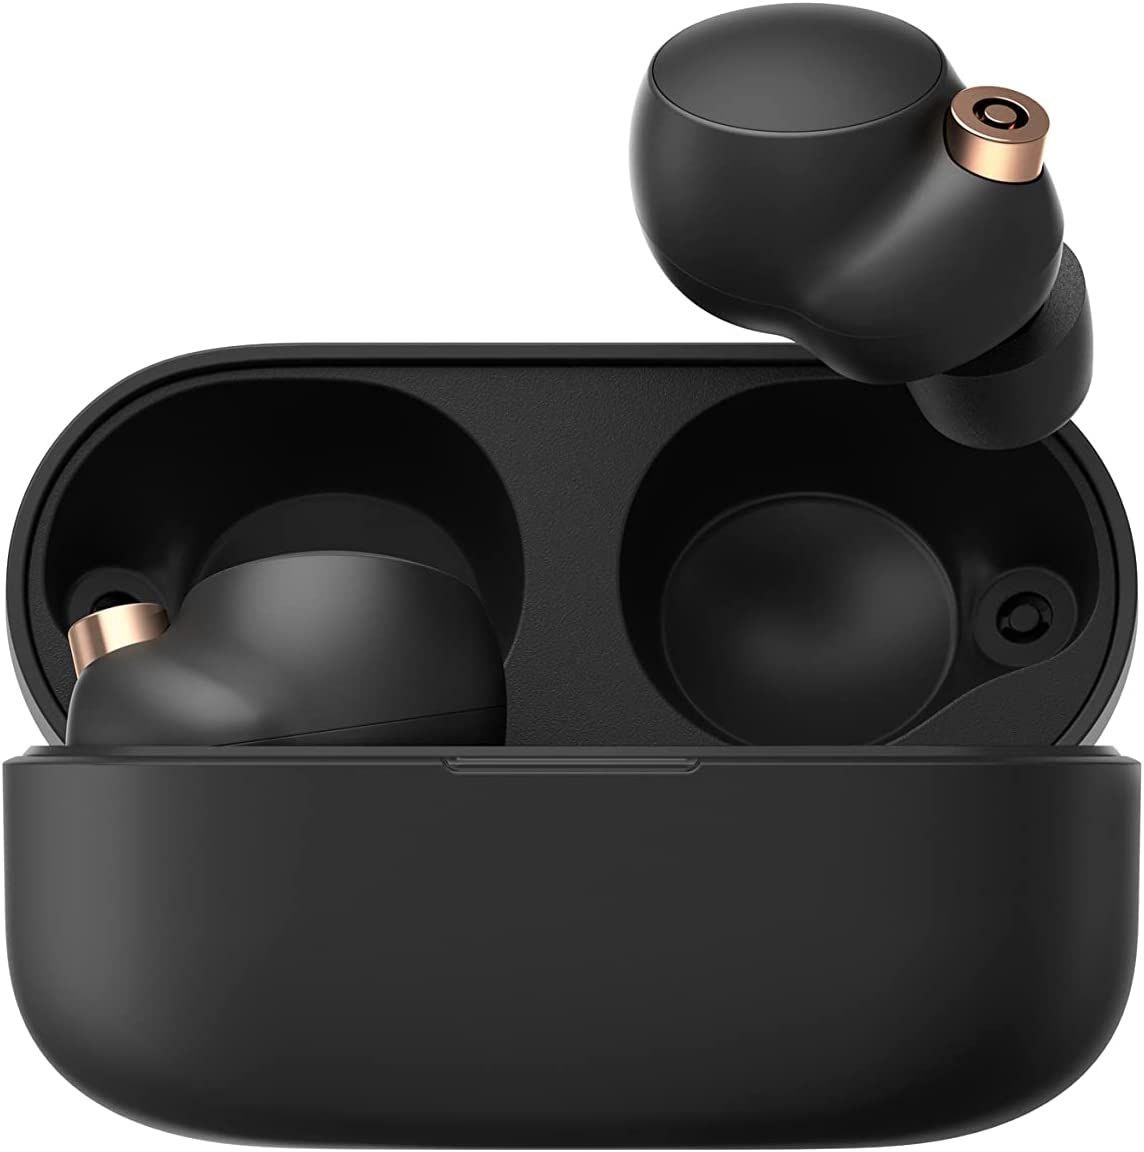 Wireless earbuds that are the best